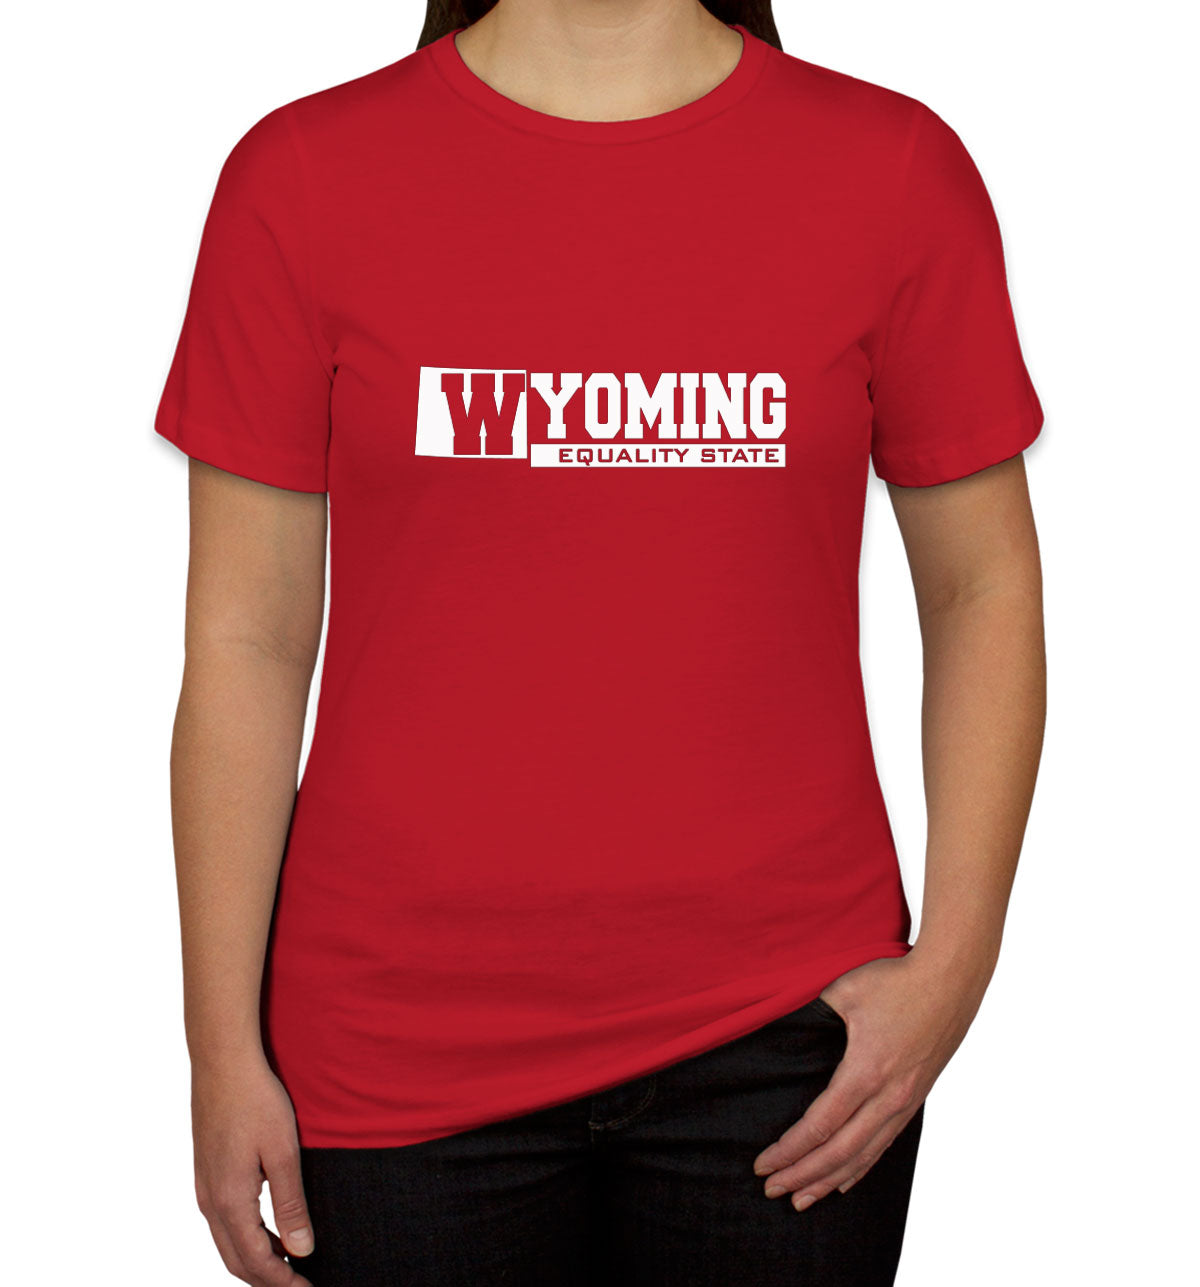 Wyoming Equality State Women's T-shirt